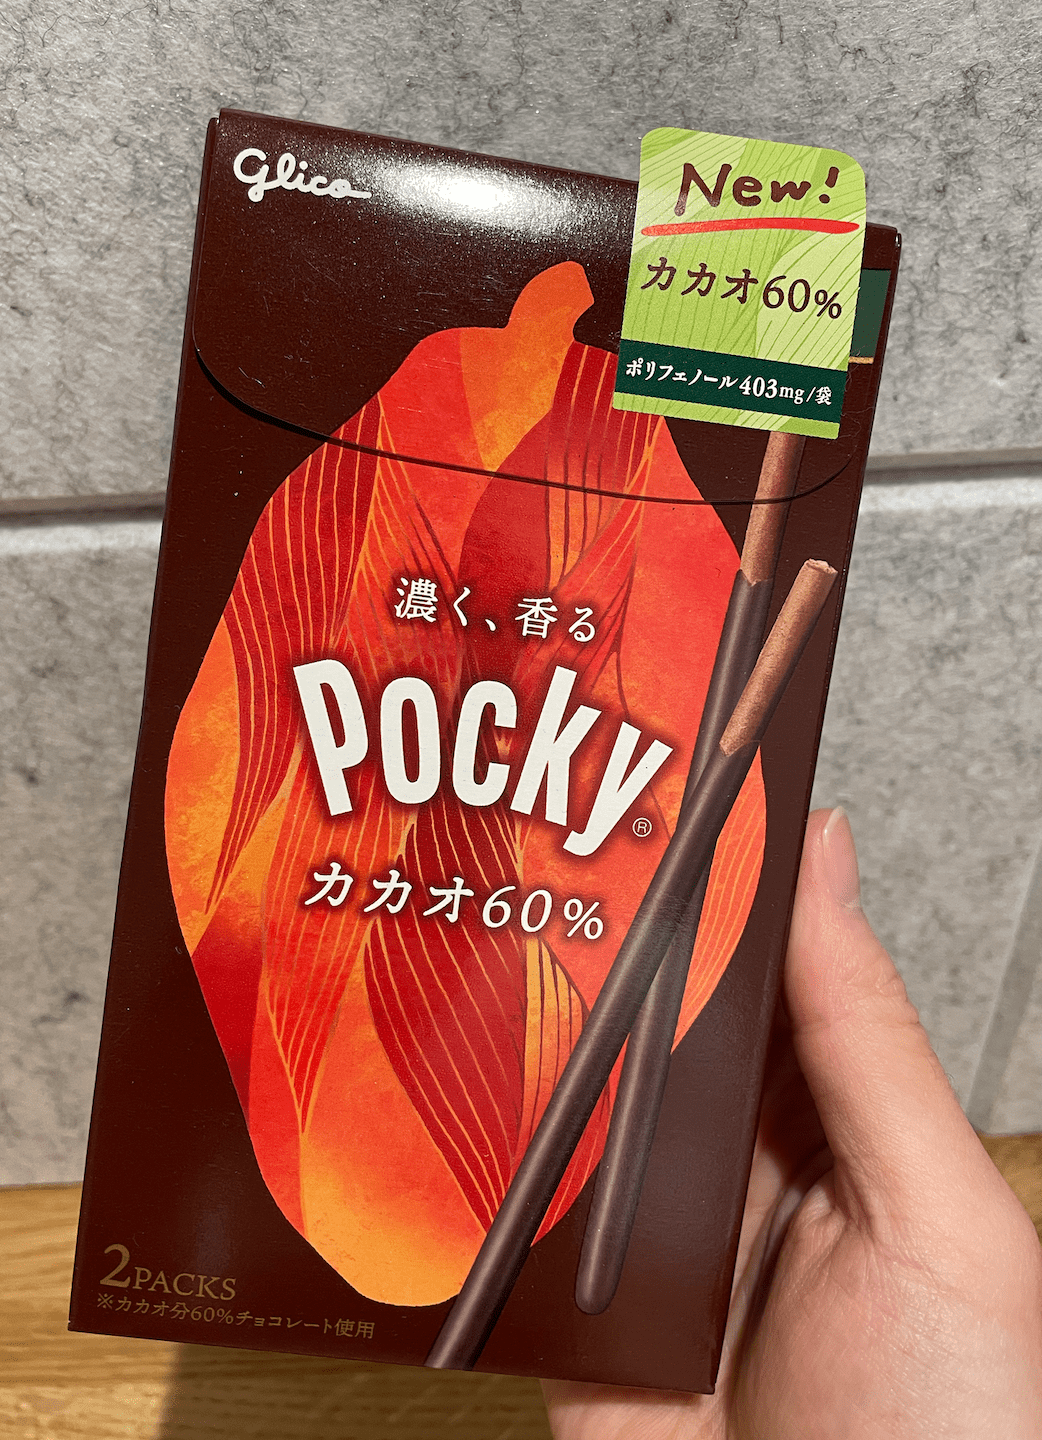 Actual product image of Pocky-Cacao-60% 1